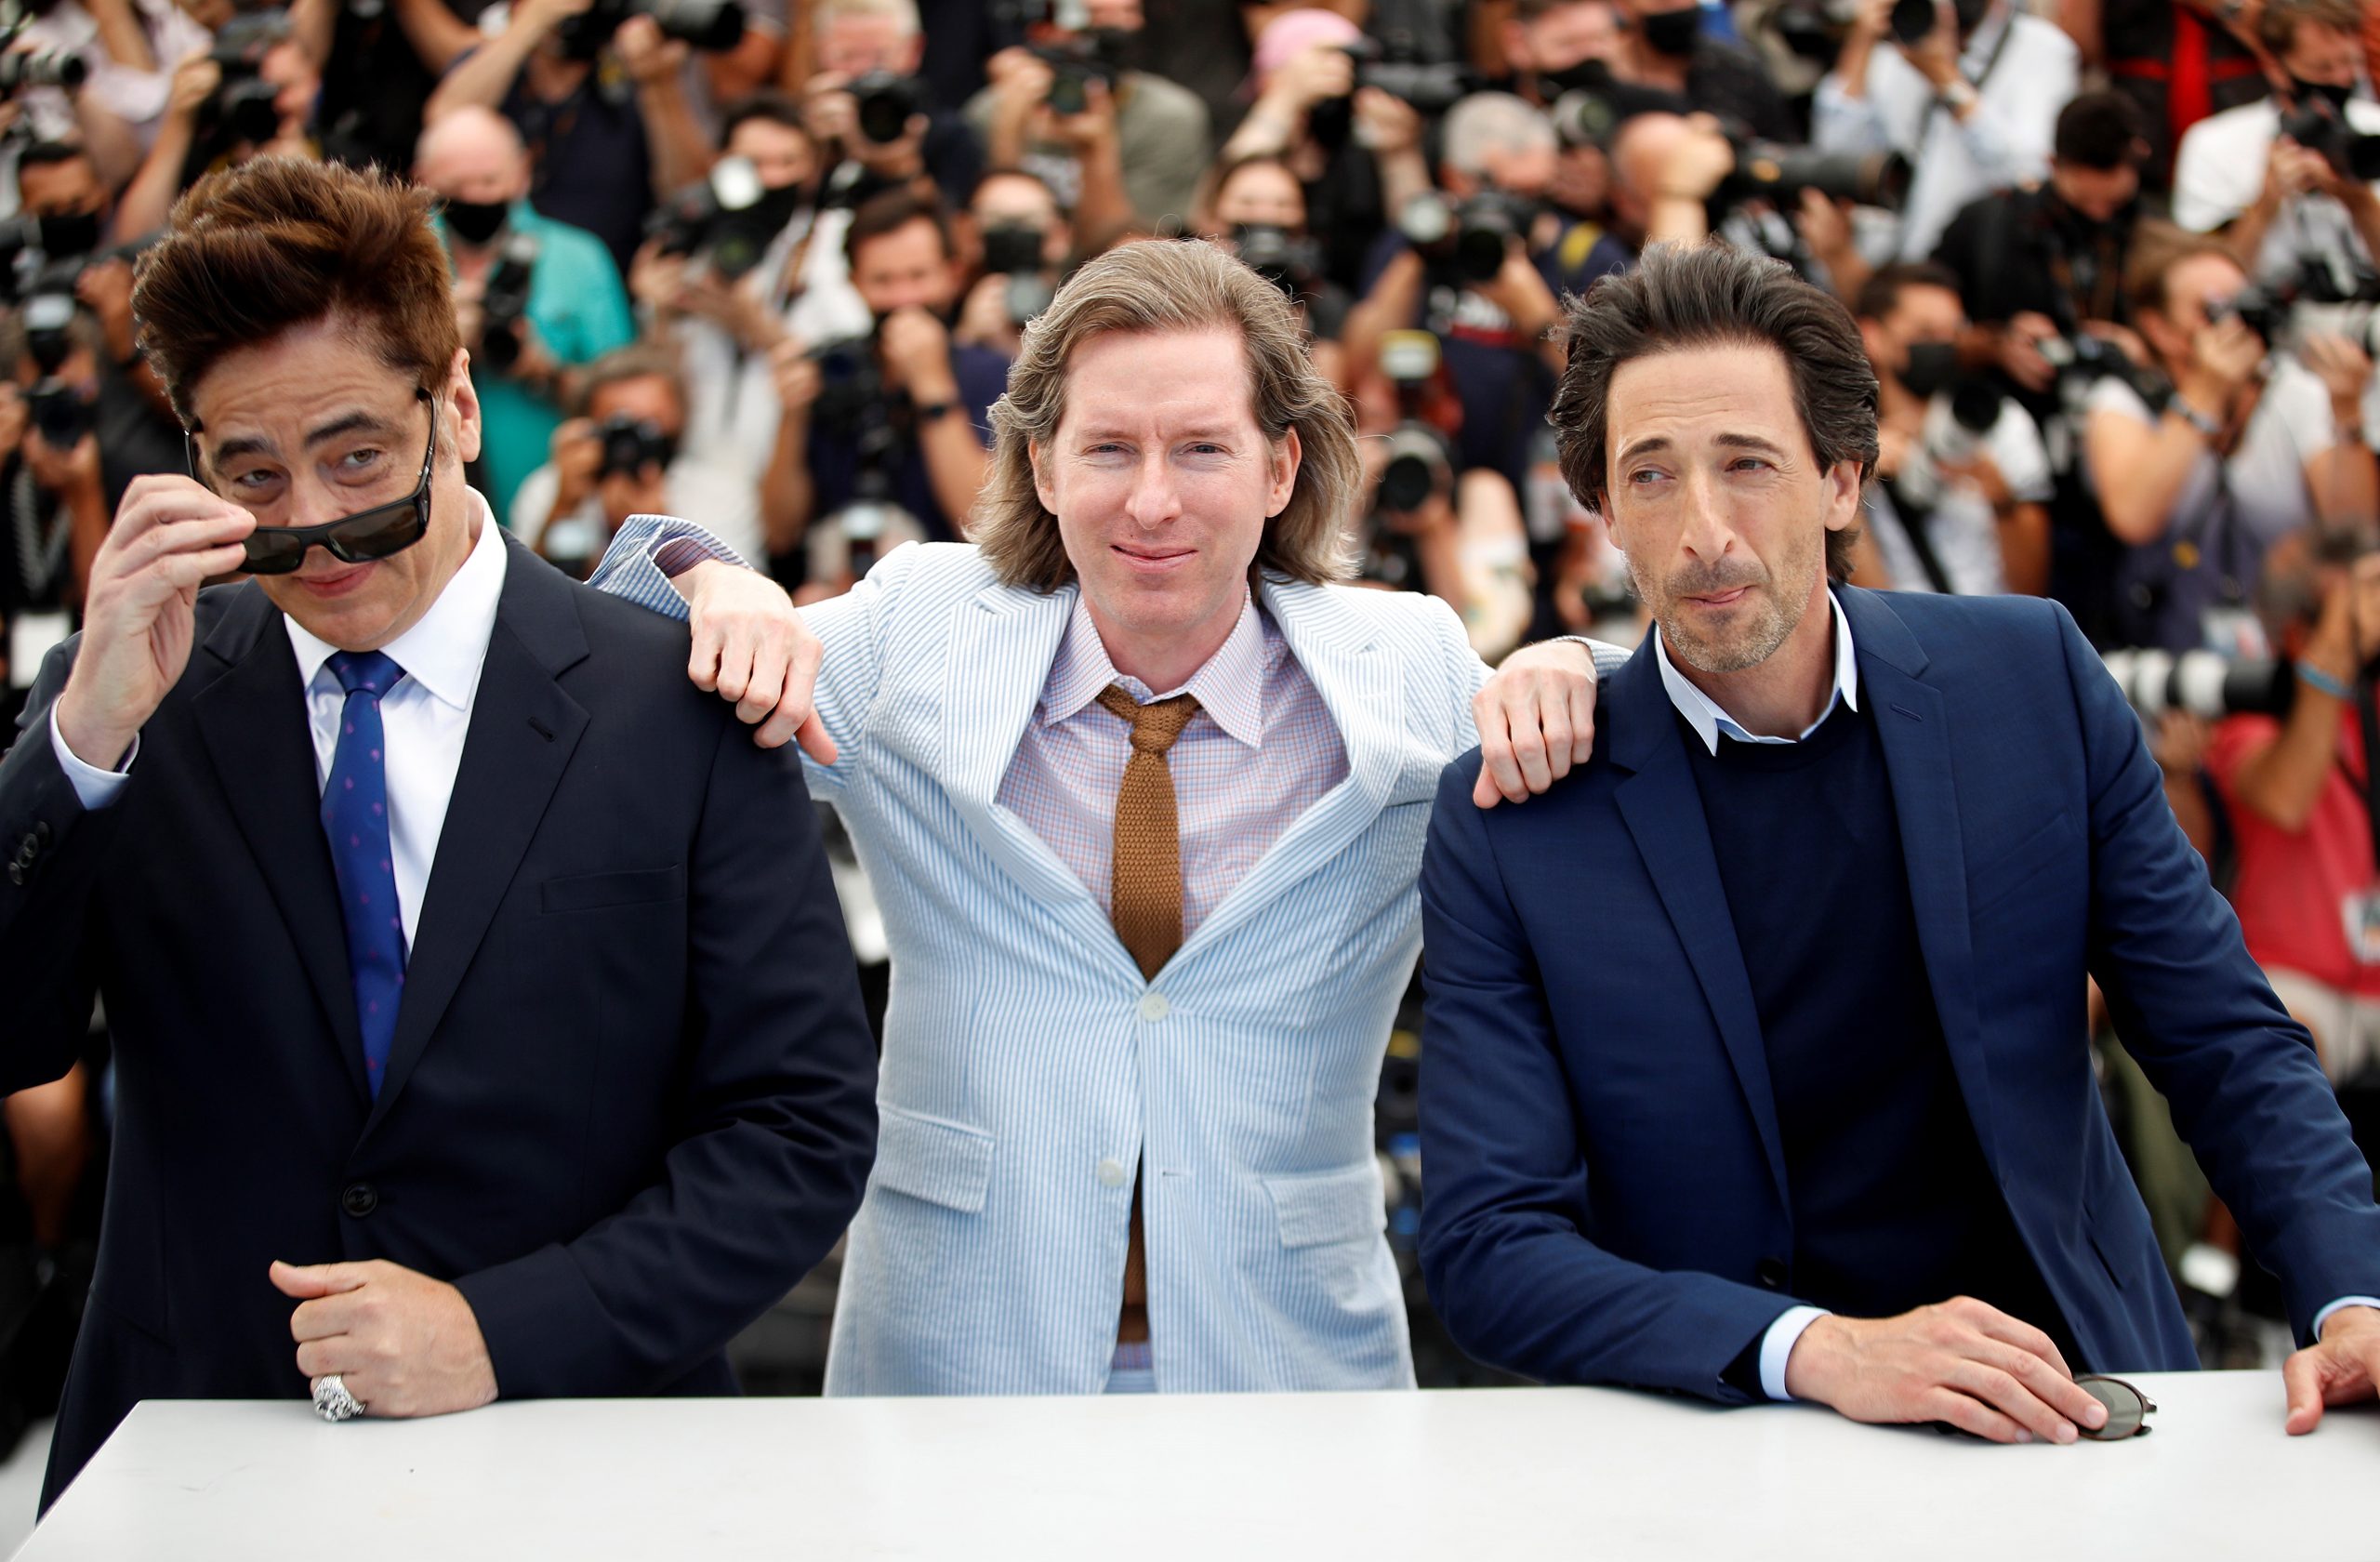 epa09341988 Benicio Del Toro (L), Wes Anderson (C) and Adrien Brody pose during the photocall for 'The French Dispatch' at the 74th annual Cannes Film Festival, in Cannes, France, 13 July 2021. The movie is presented in the Official Competition of the festival which runs from 06 to 17 July.  EPA/SEBASTIEN NOGIER